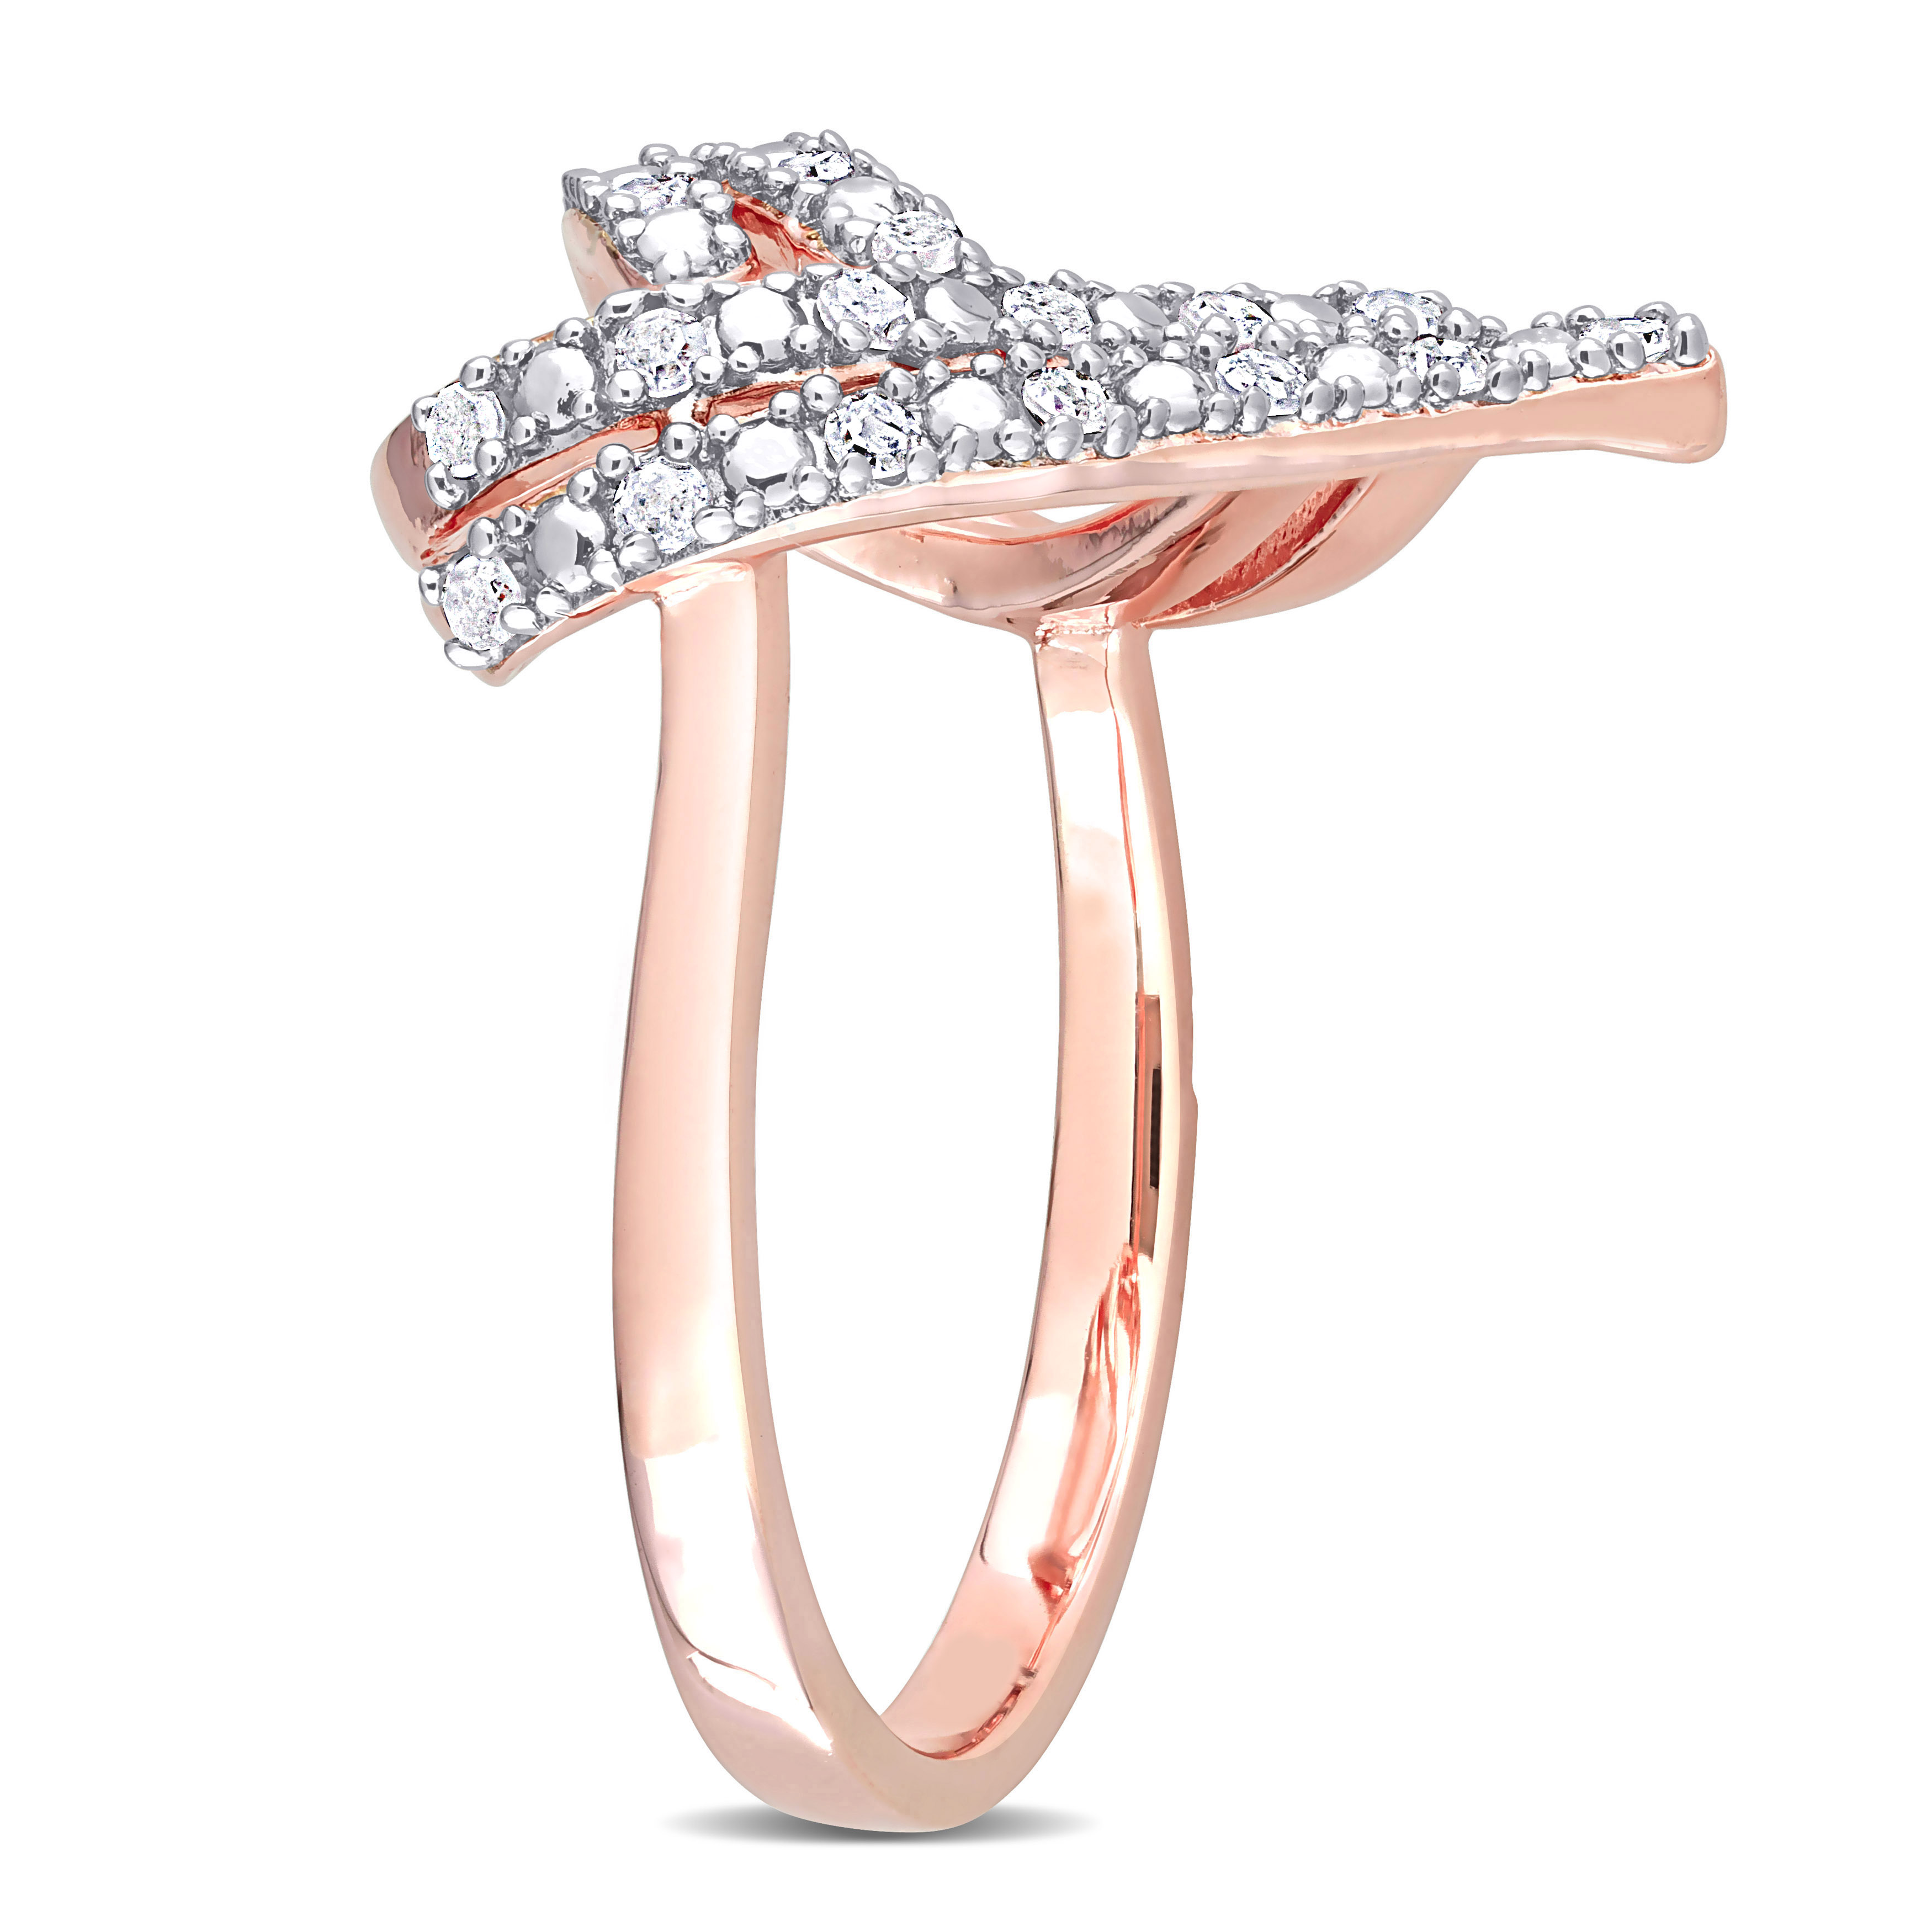 1/5 CT TW Diamond Open Heart Ring in Rose Plated Sterling Silver